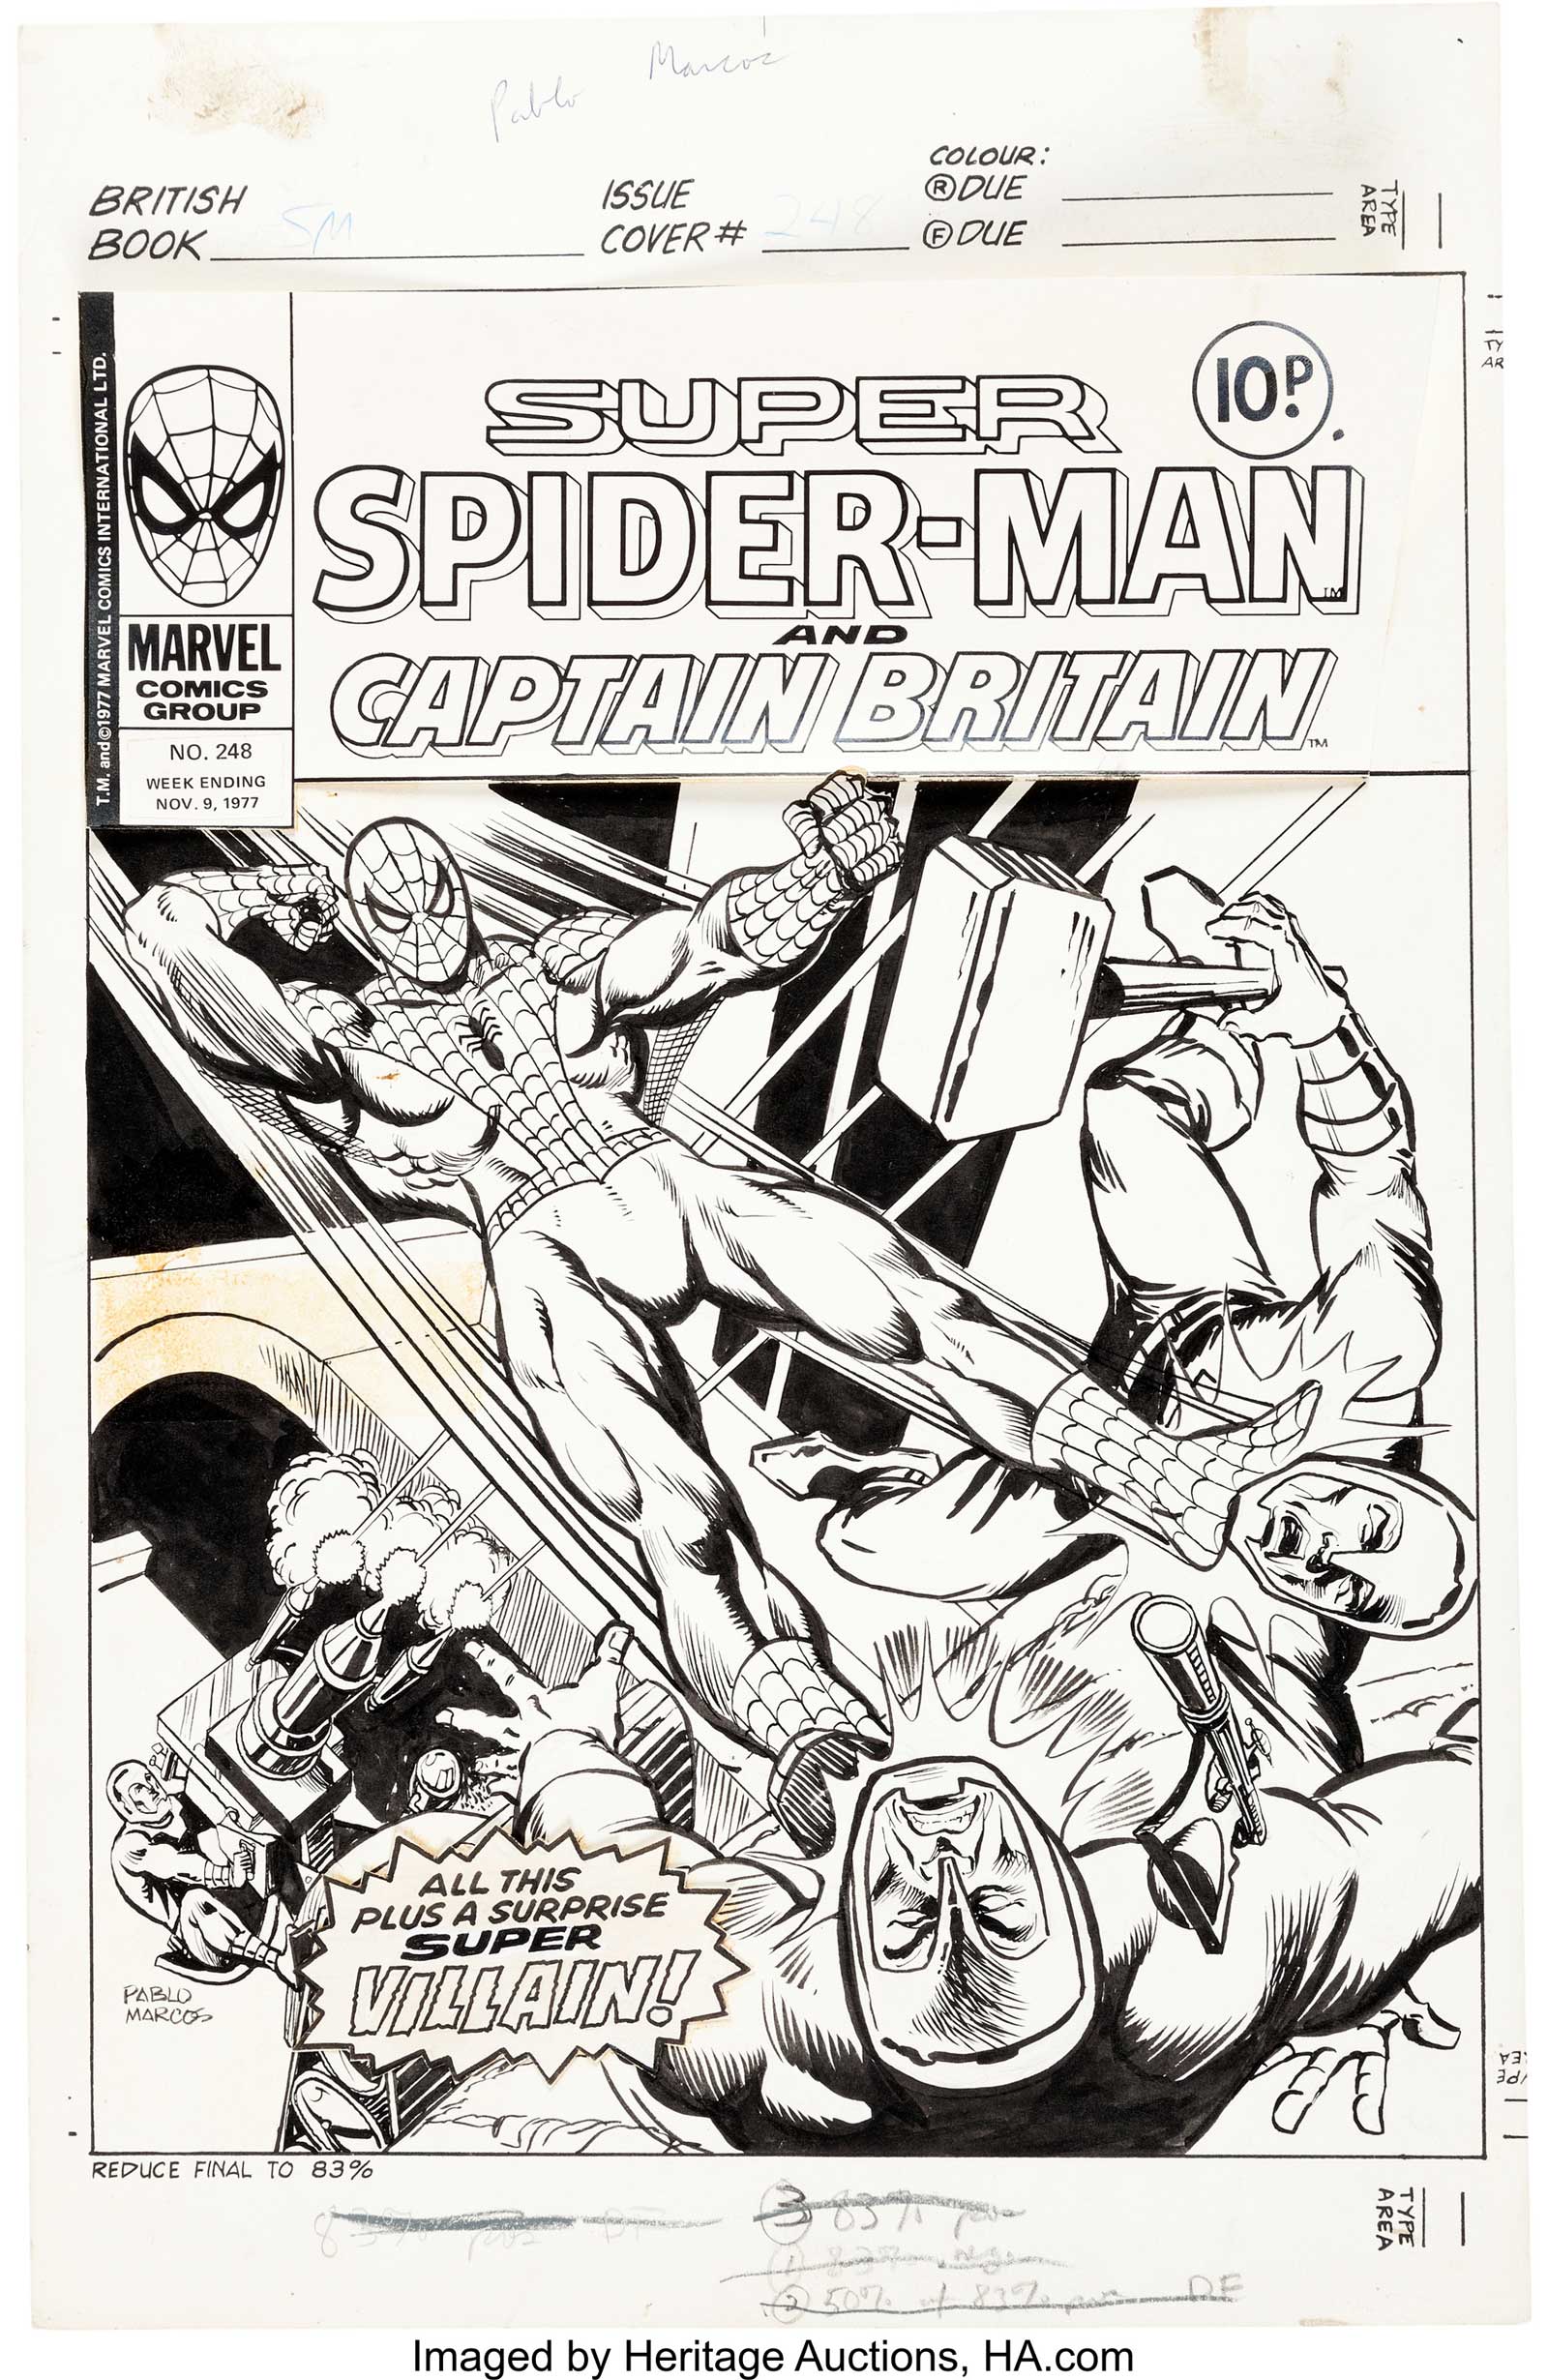 Pablo Marcos Super Spider-Man #248 Cover Original Art (Marvel UK, 1977). A dynamic Pablo Marcos image. The logo, which includes "Captain Britain" and corner box are paste-up. There is an included star-burst paste-up that proclaims "All this plus a surprise Super Villain!" It is loose. It fits the glue residue shape perfectly, but does not match the text on the published cover. This could have been changed during production after the cover was shot. There are production oil stains in the top margin. In Very Good condition.